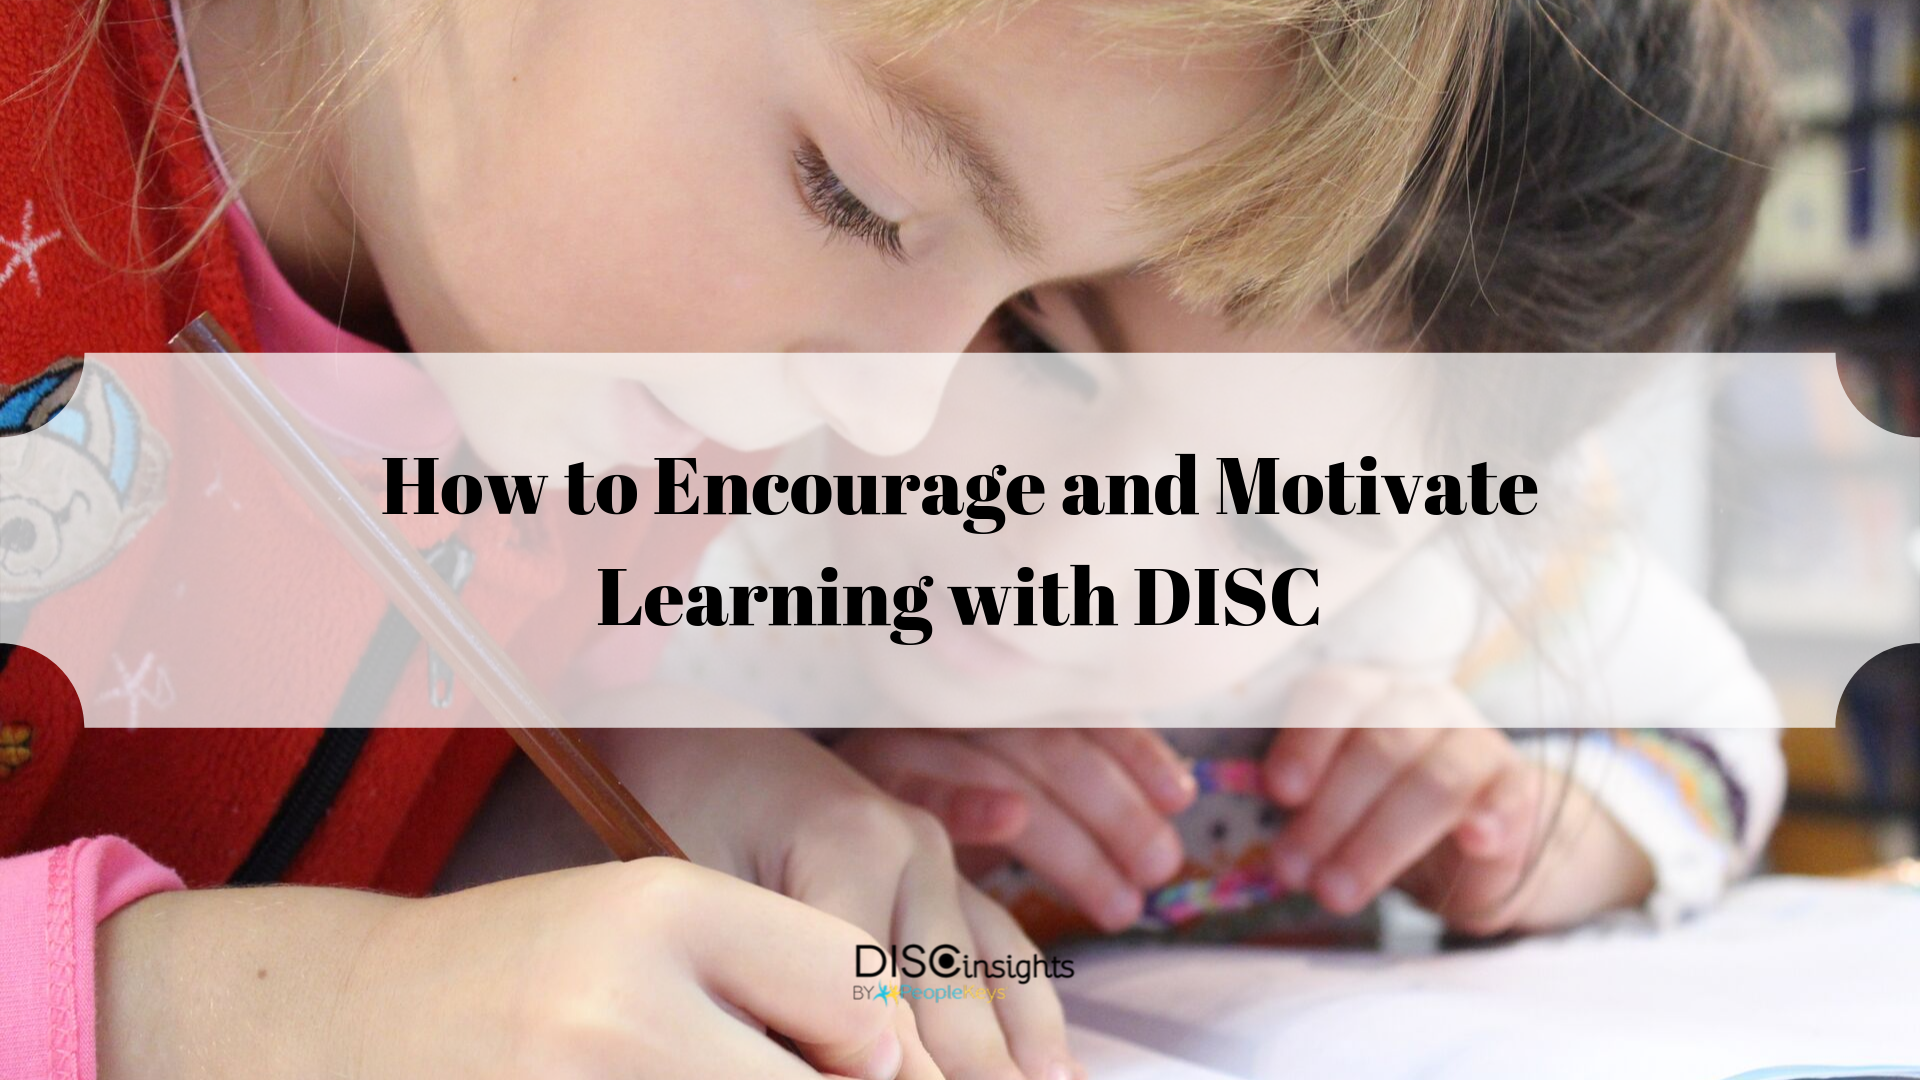 How to Encourage and Motivate Learning with DISC